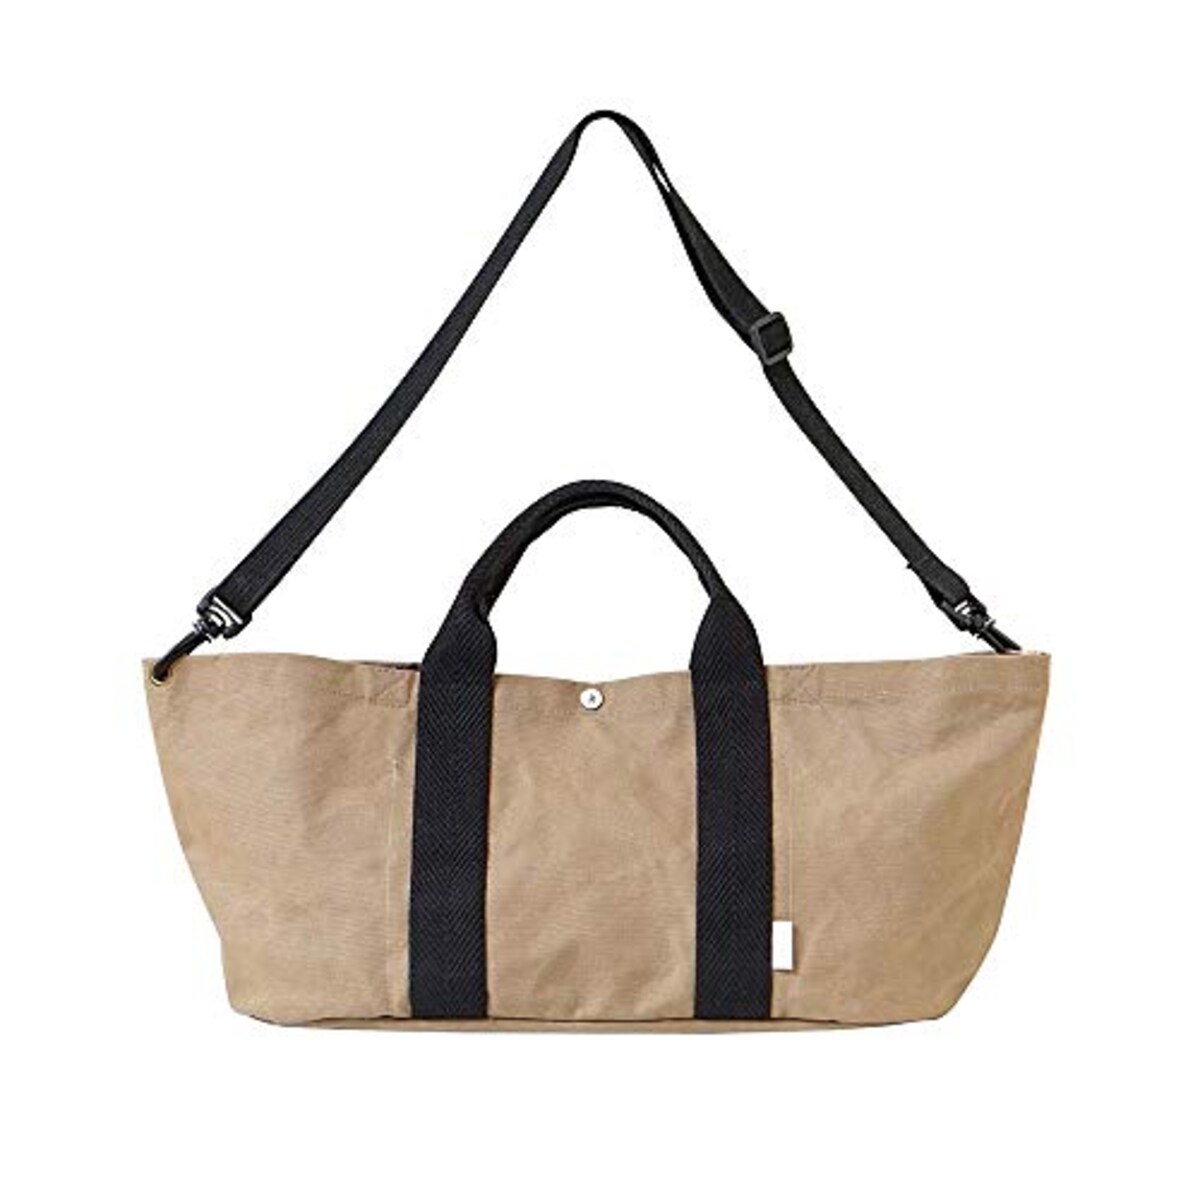 PATTO SATTO TOTE （パッとサッとトート）